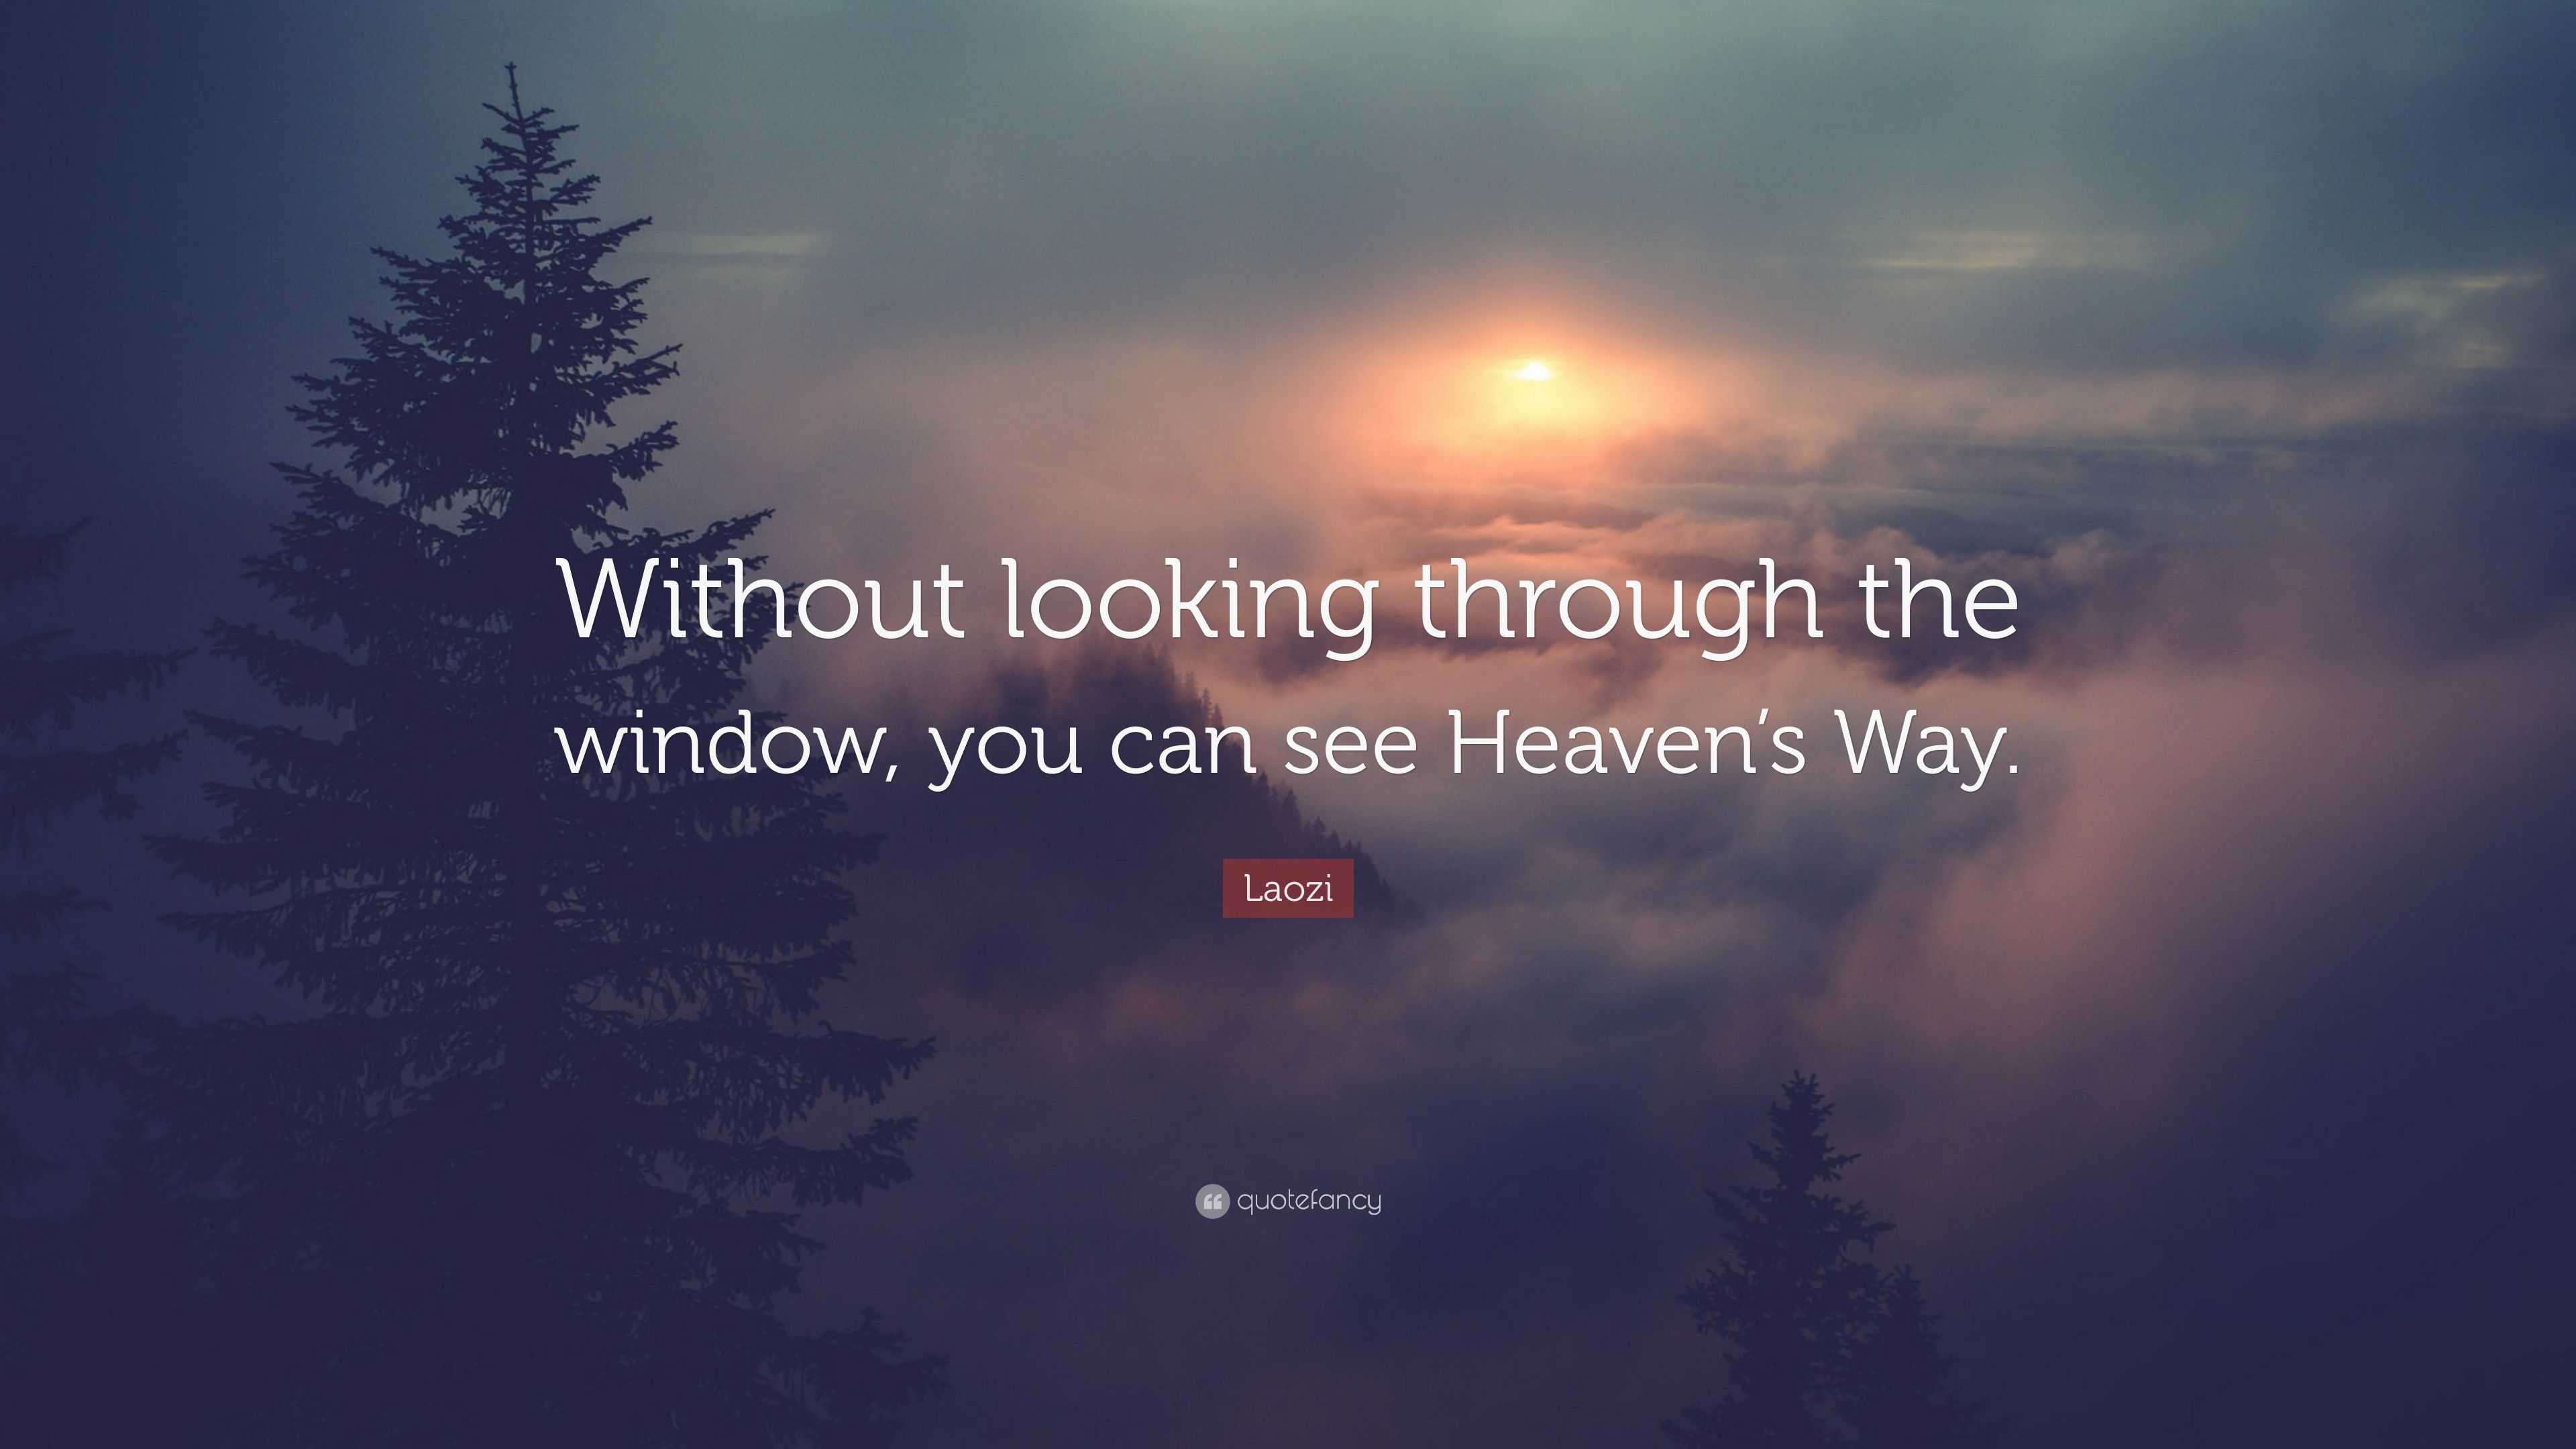 5436956-Laozi-Quote-Without-looking-through-the-window-you-can-see-Heaven.jpg